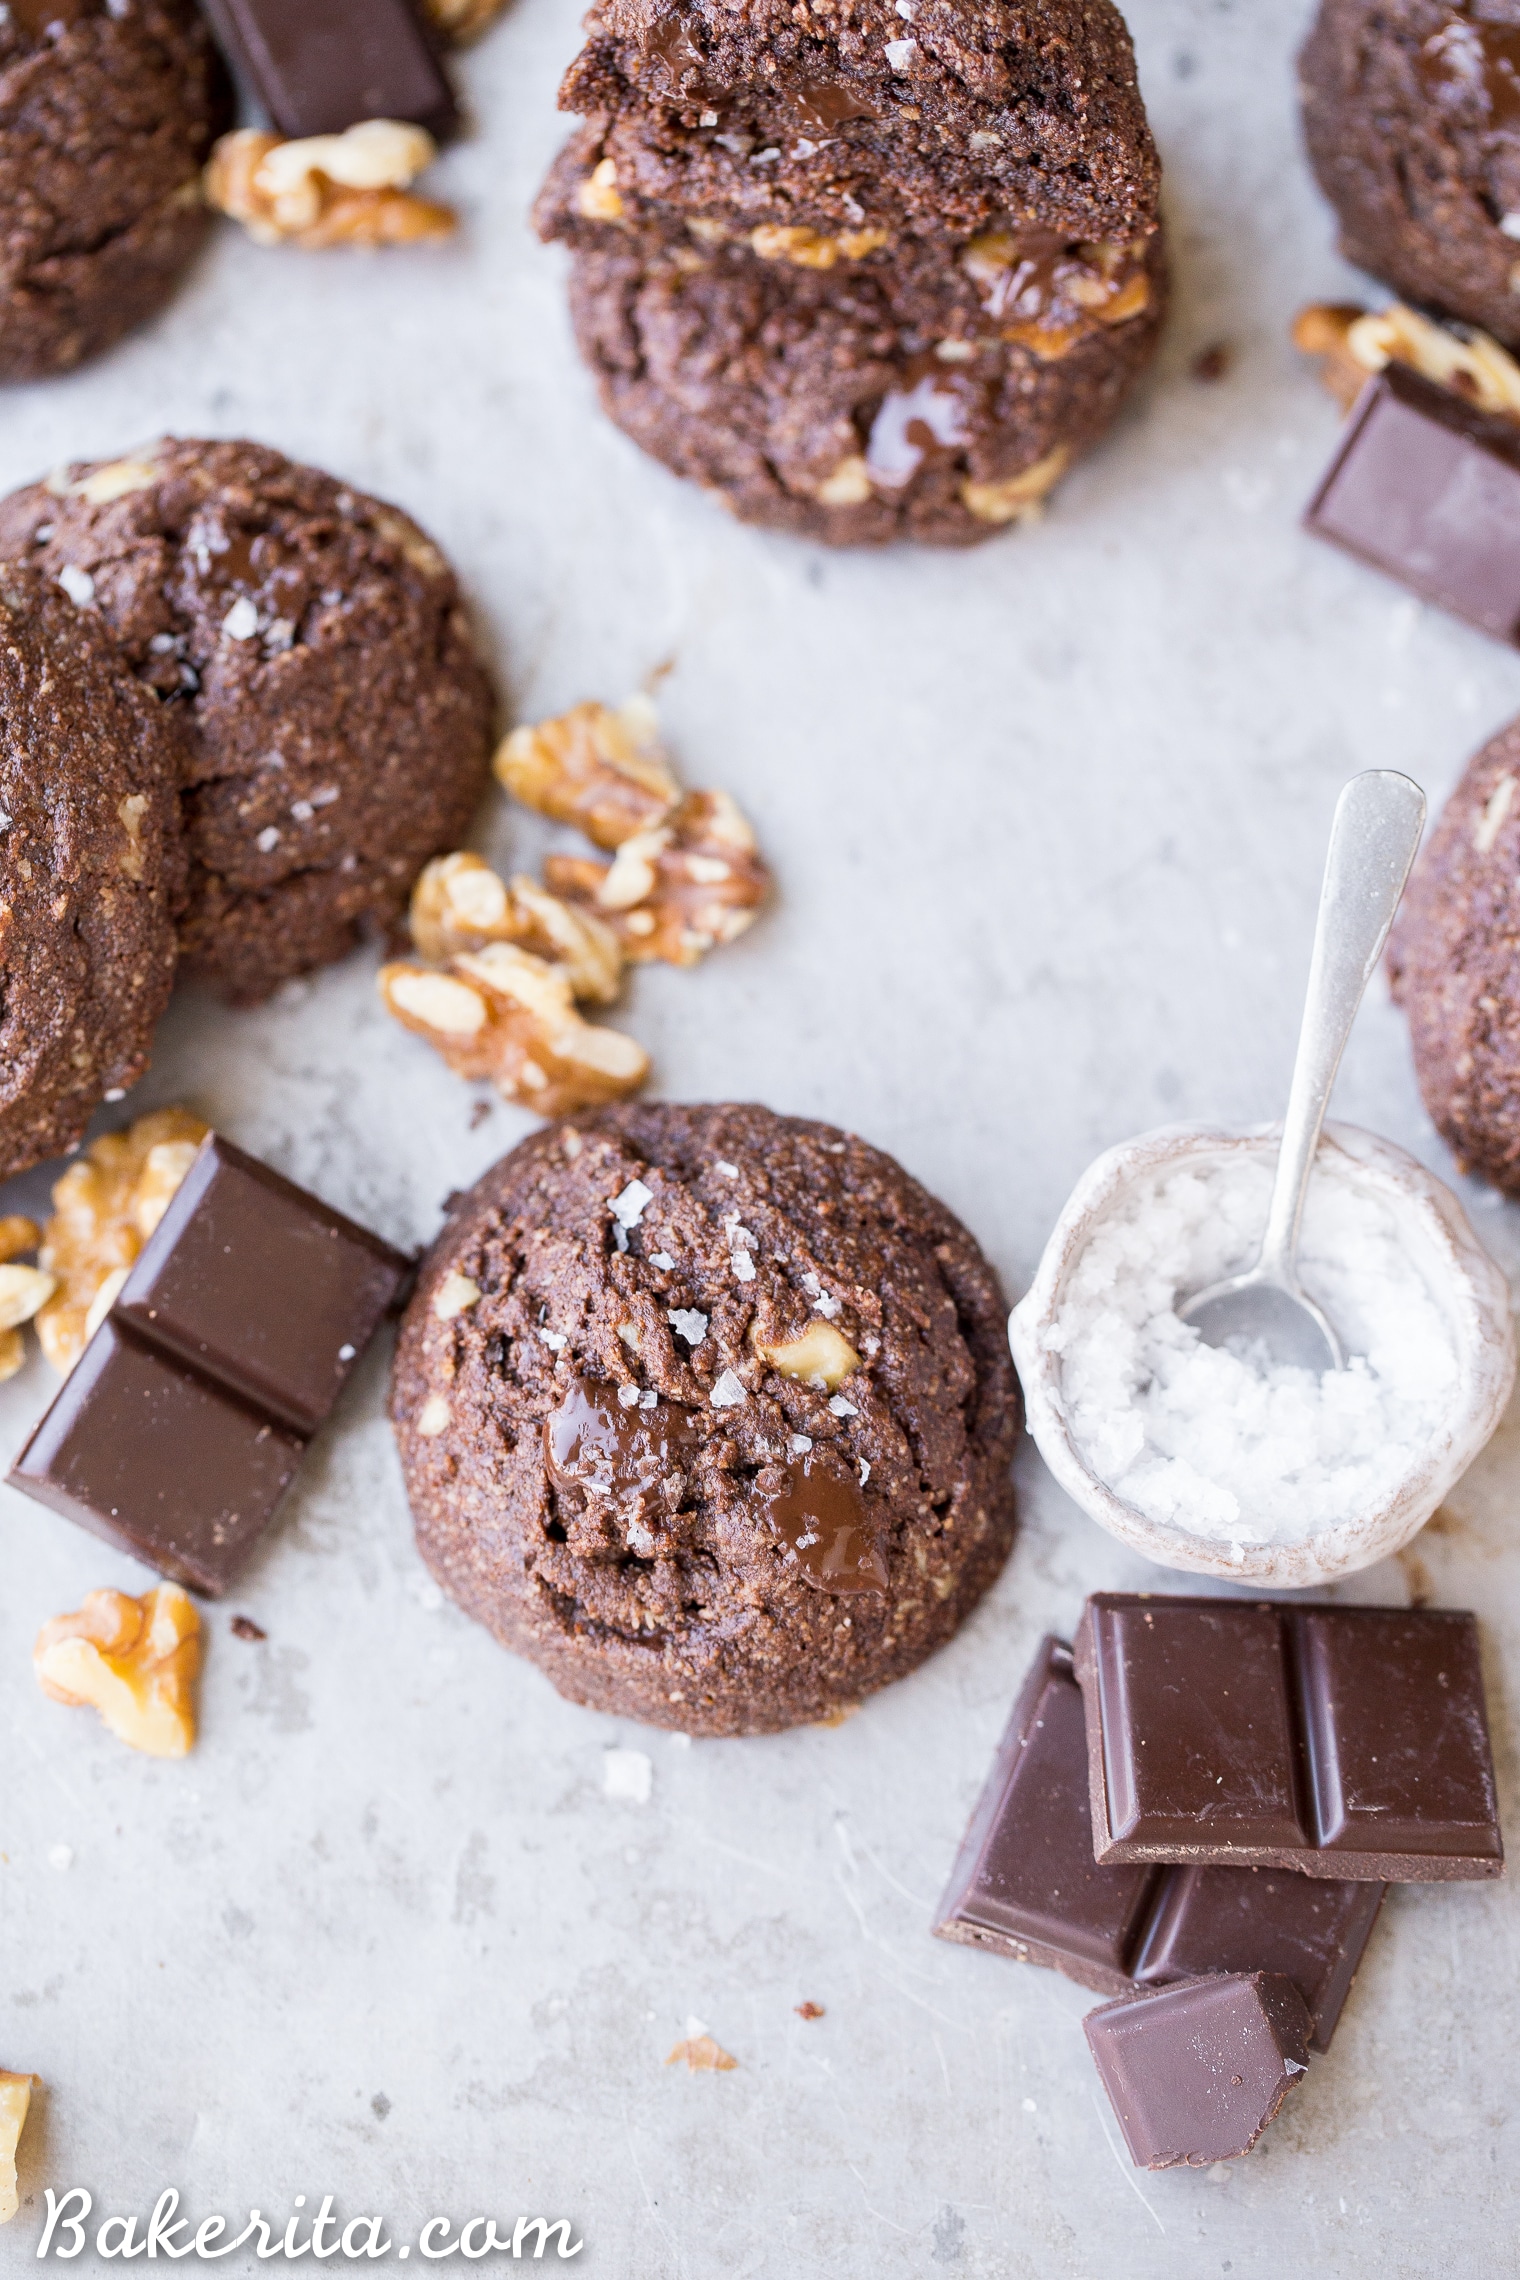 These Dark Chocolate Chunk Cookies are incredibly rich and dark, with melty chocolate chunks and toasted walnuts for crunch. These chewy, fudgy dark chocolate chip cookies are gluten-free, paleo, and vegan, and perfect for the chocolate lover in your life. 